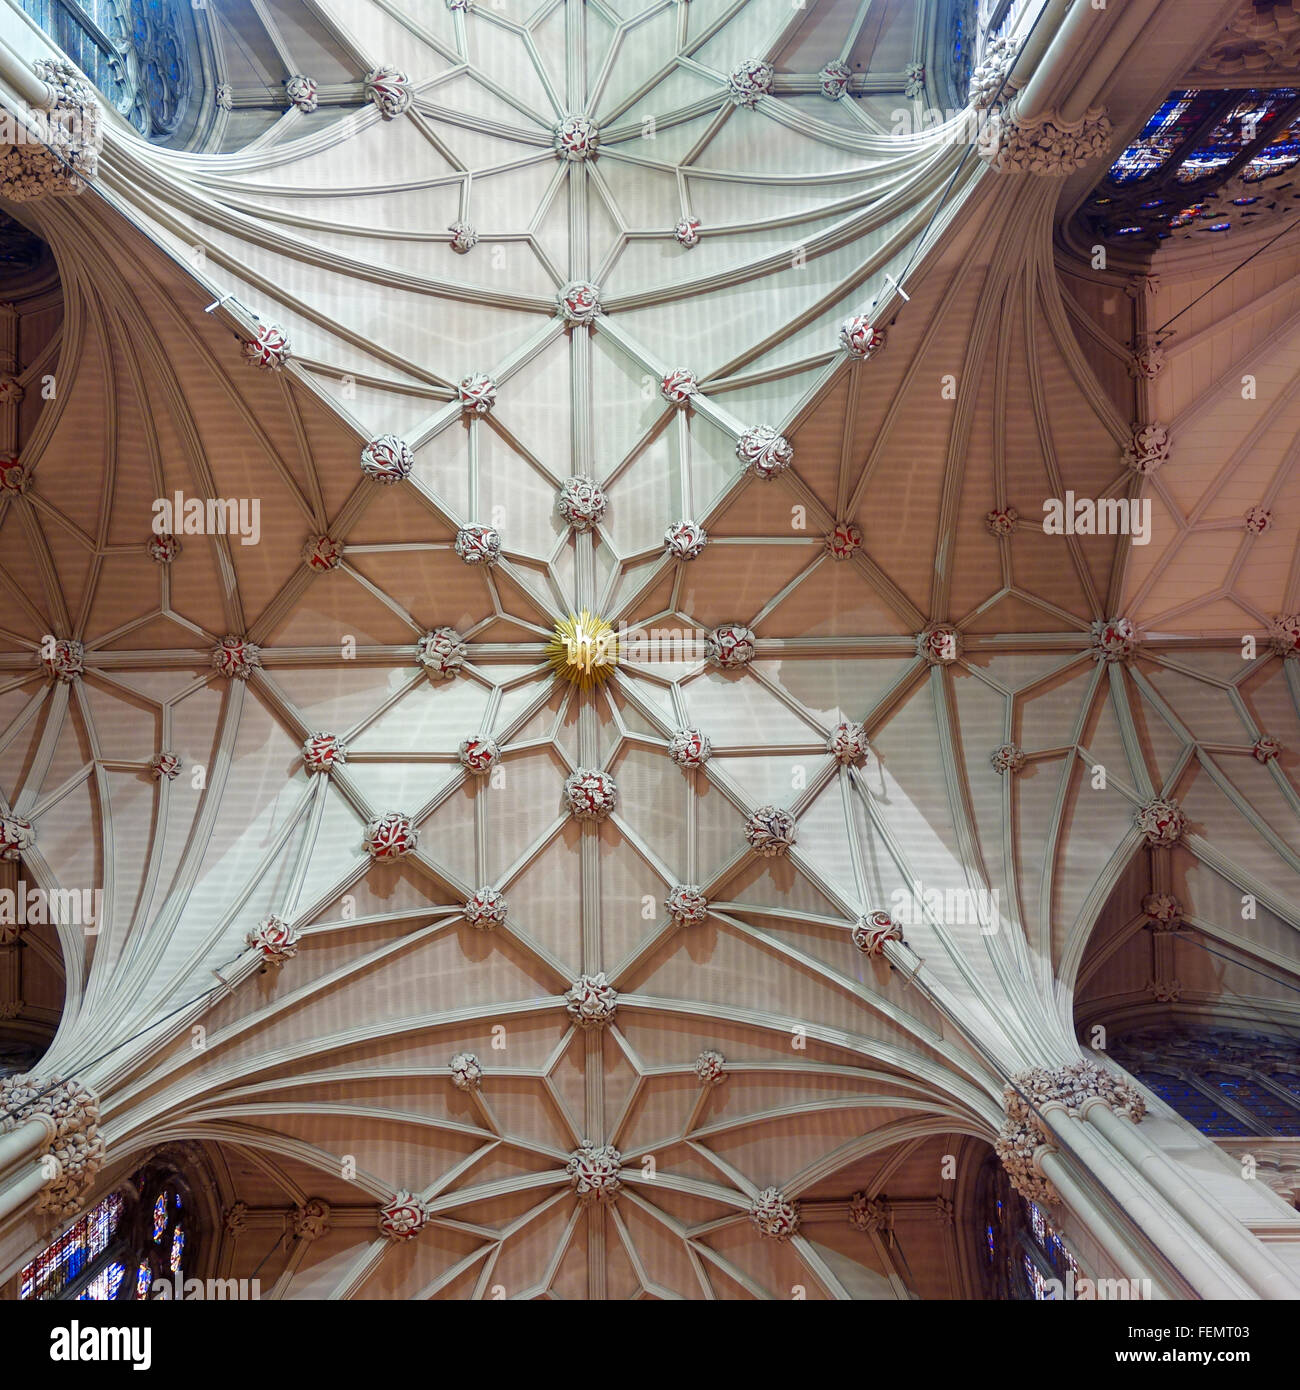 Vaulted ceiling of St Patrick's Cathedral, Manhattan, New York City, USA Stock Photo